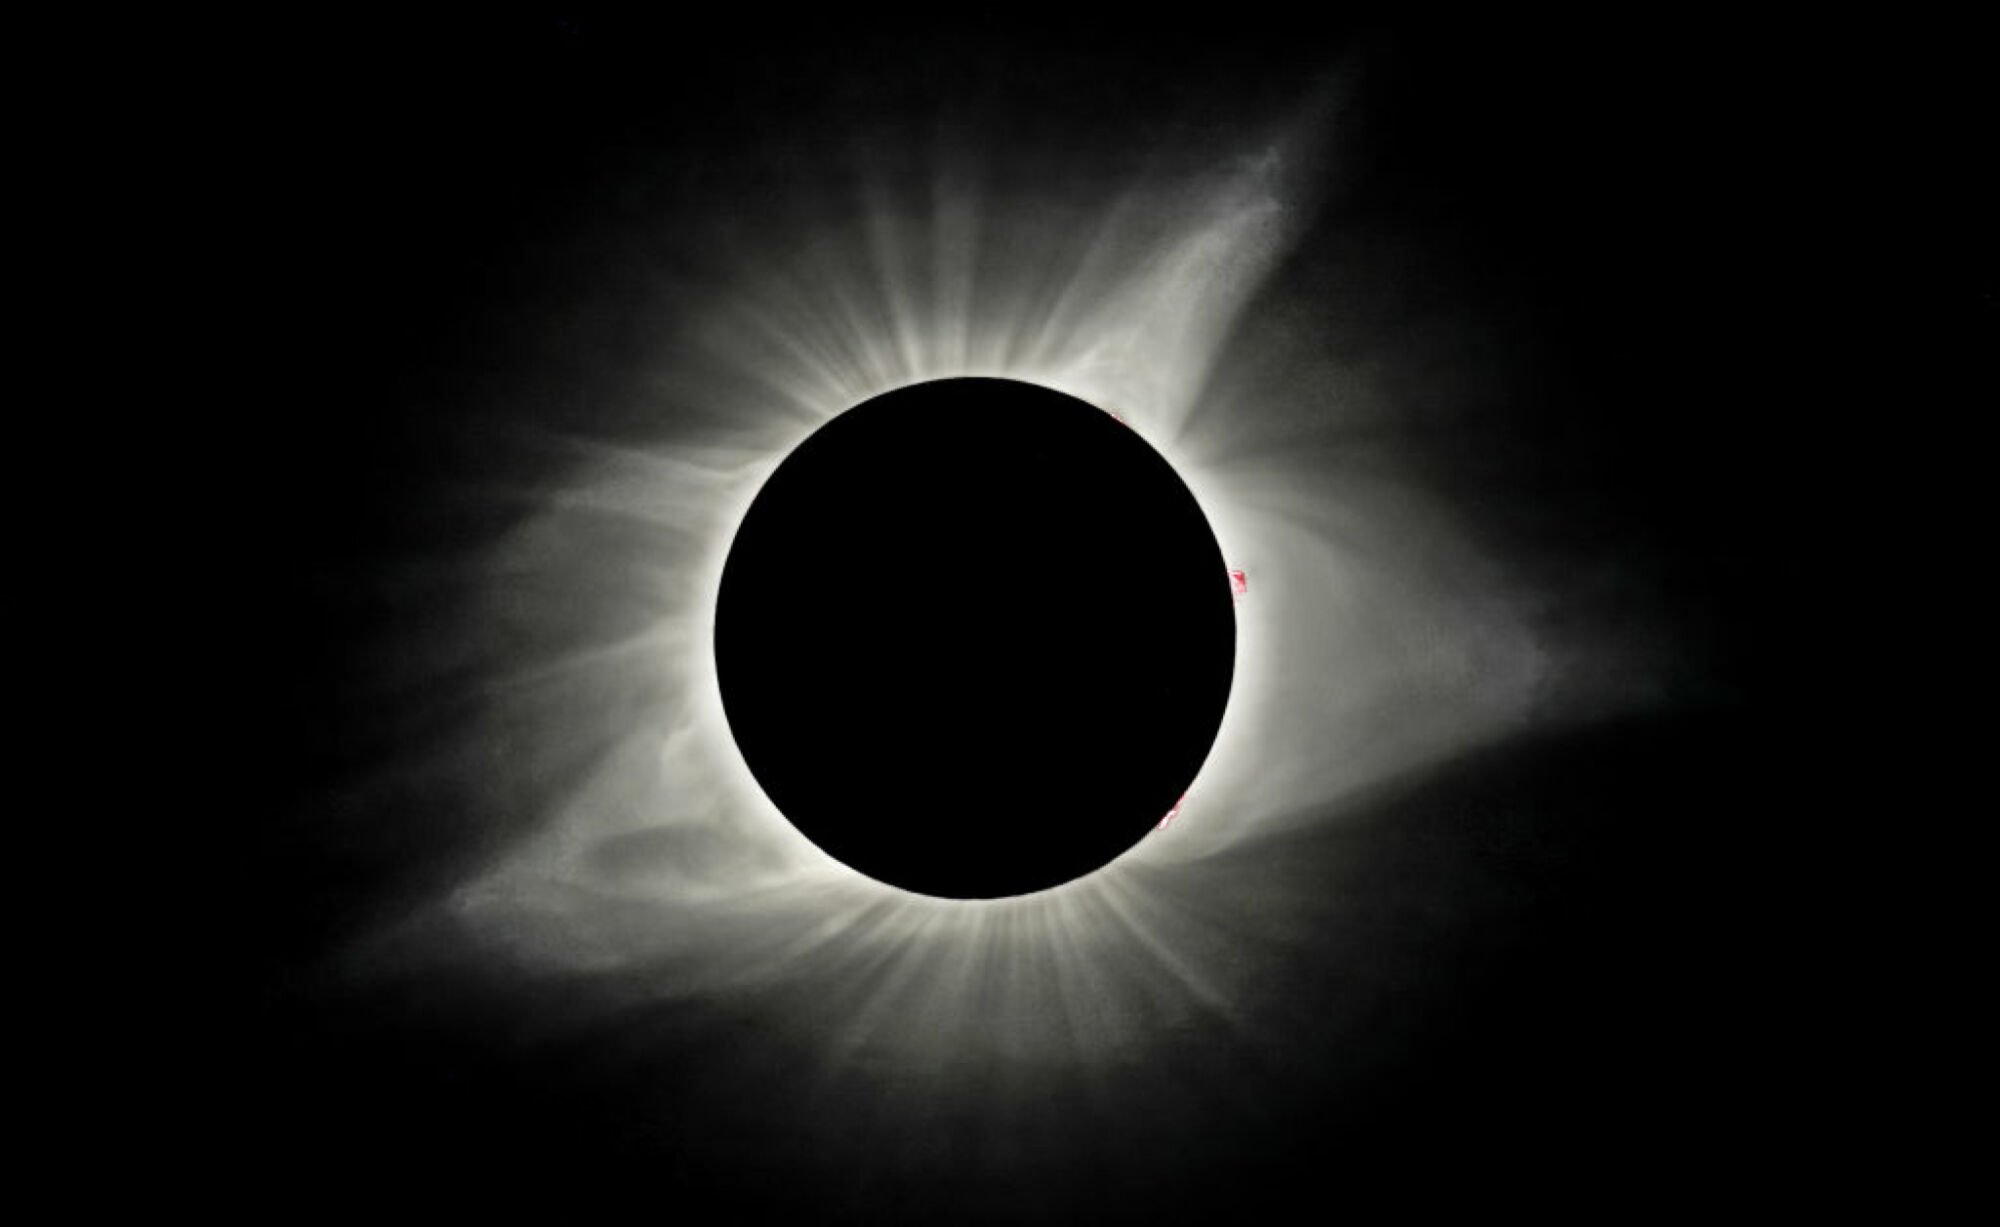 The sun's corona glowing during a total solar eclipse